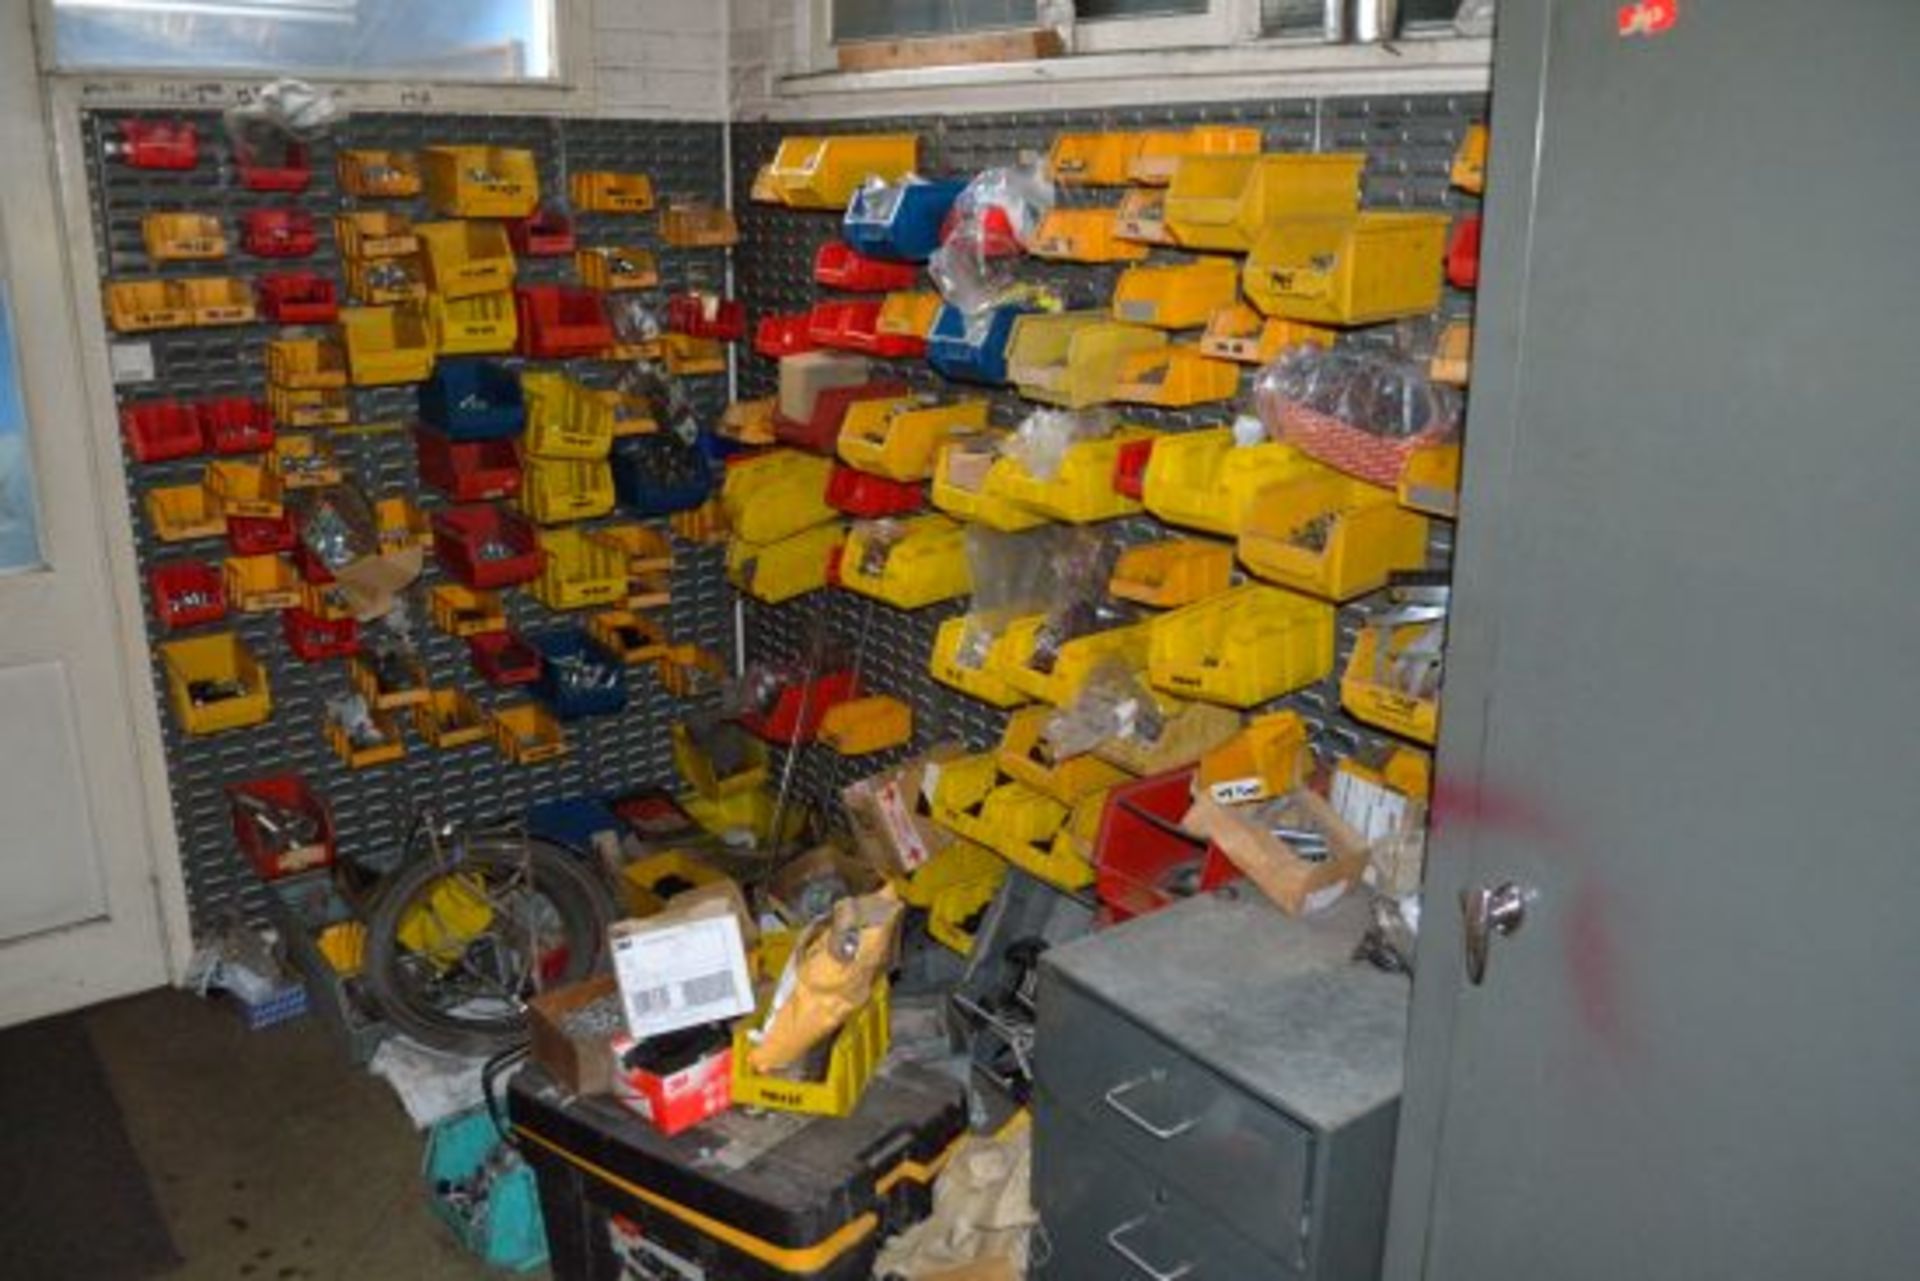 Contents of store room containing various fasteners and tools